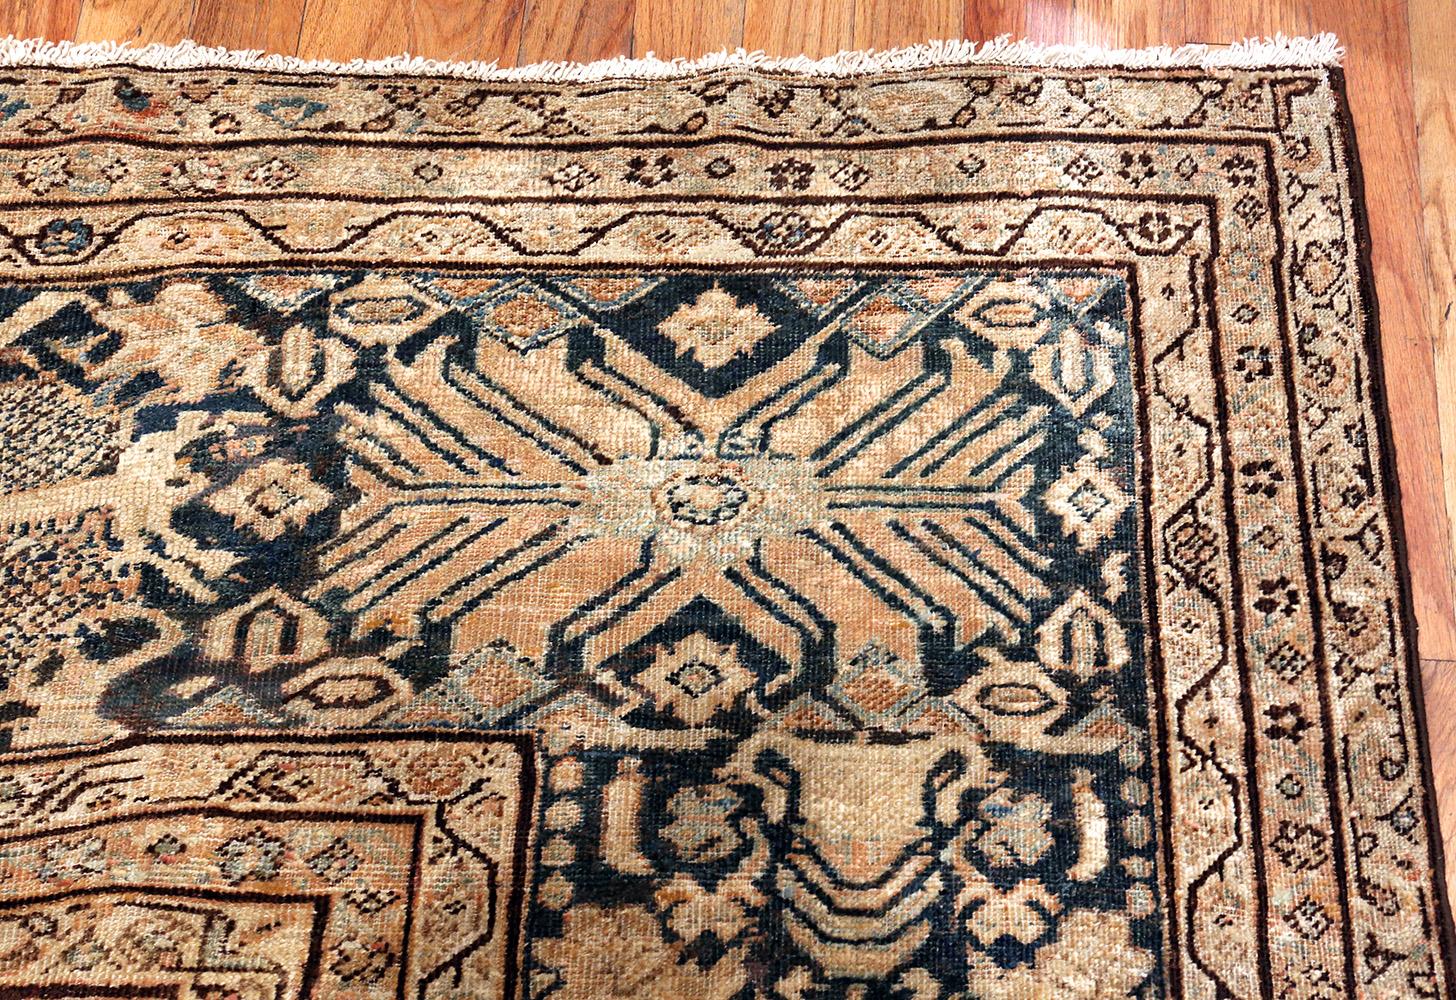 Large Oversize Antique Persian Sultanabad Rug. Size: 14 ft 6 in x 22 ft 6